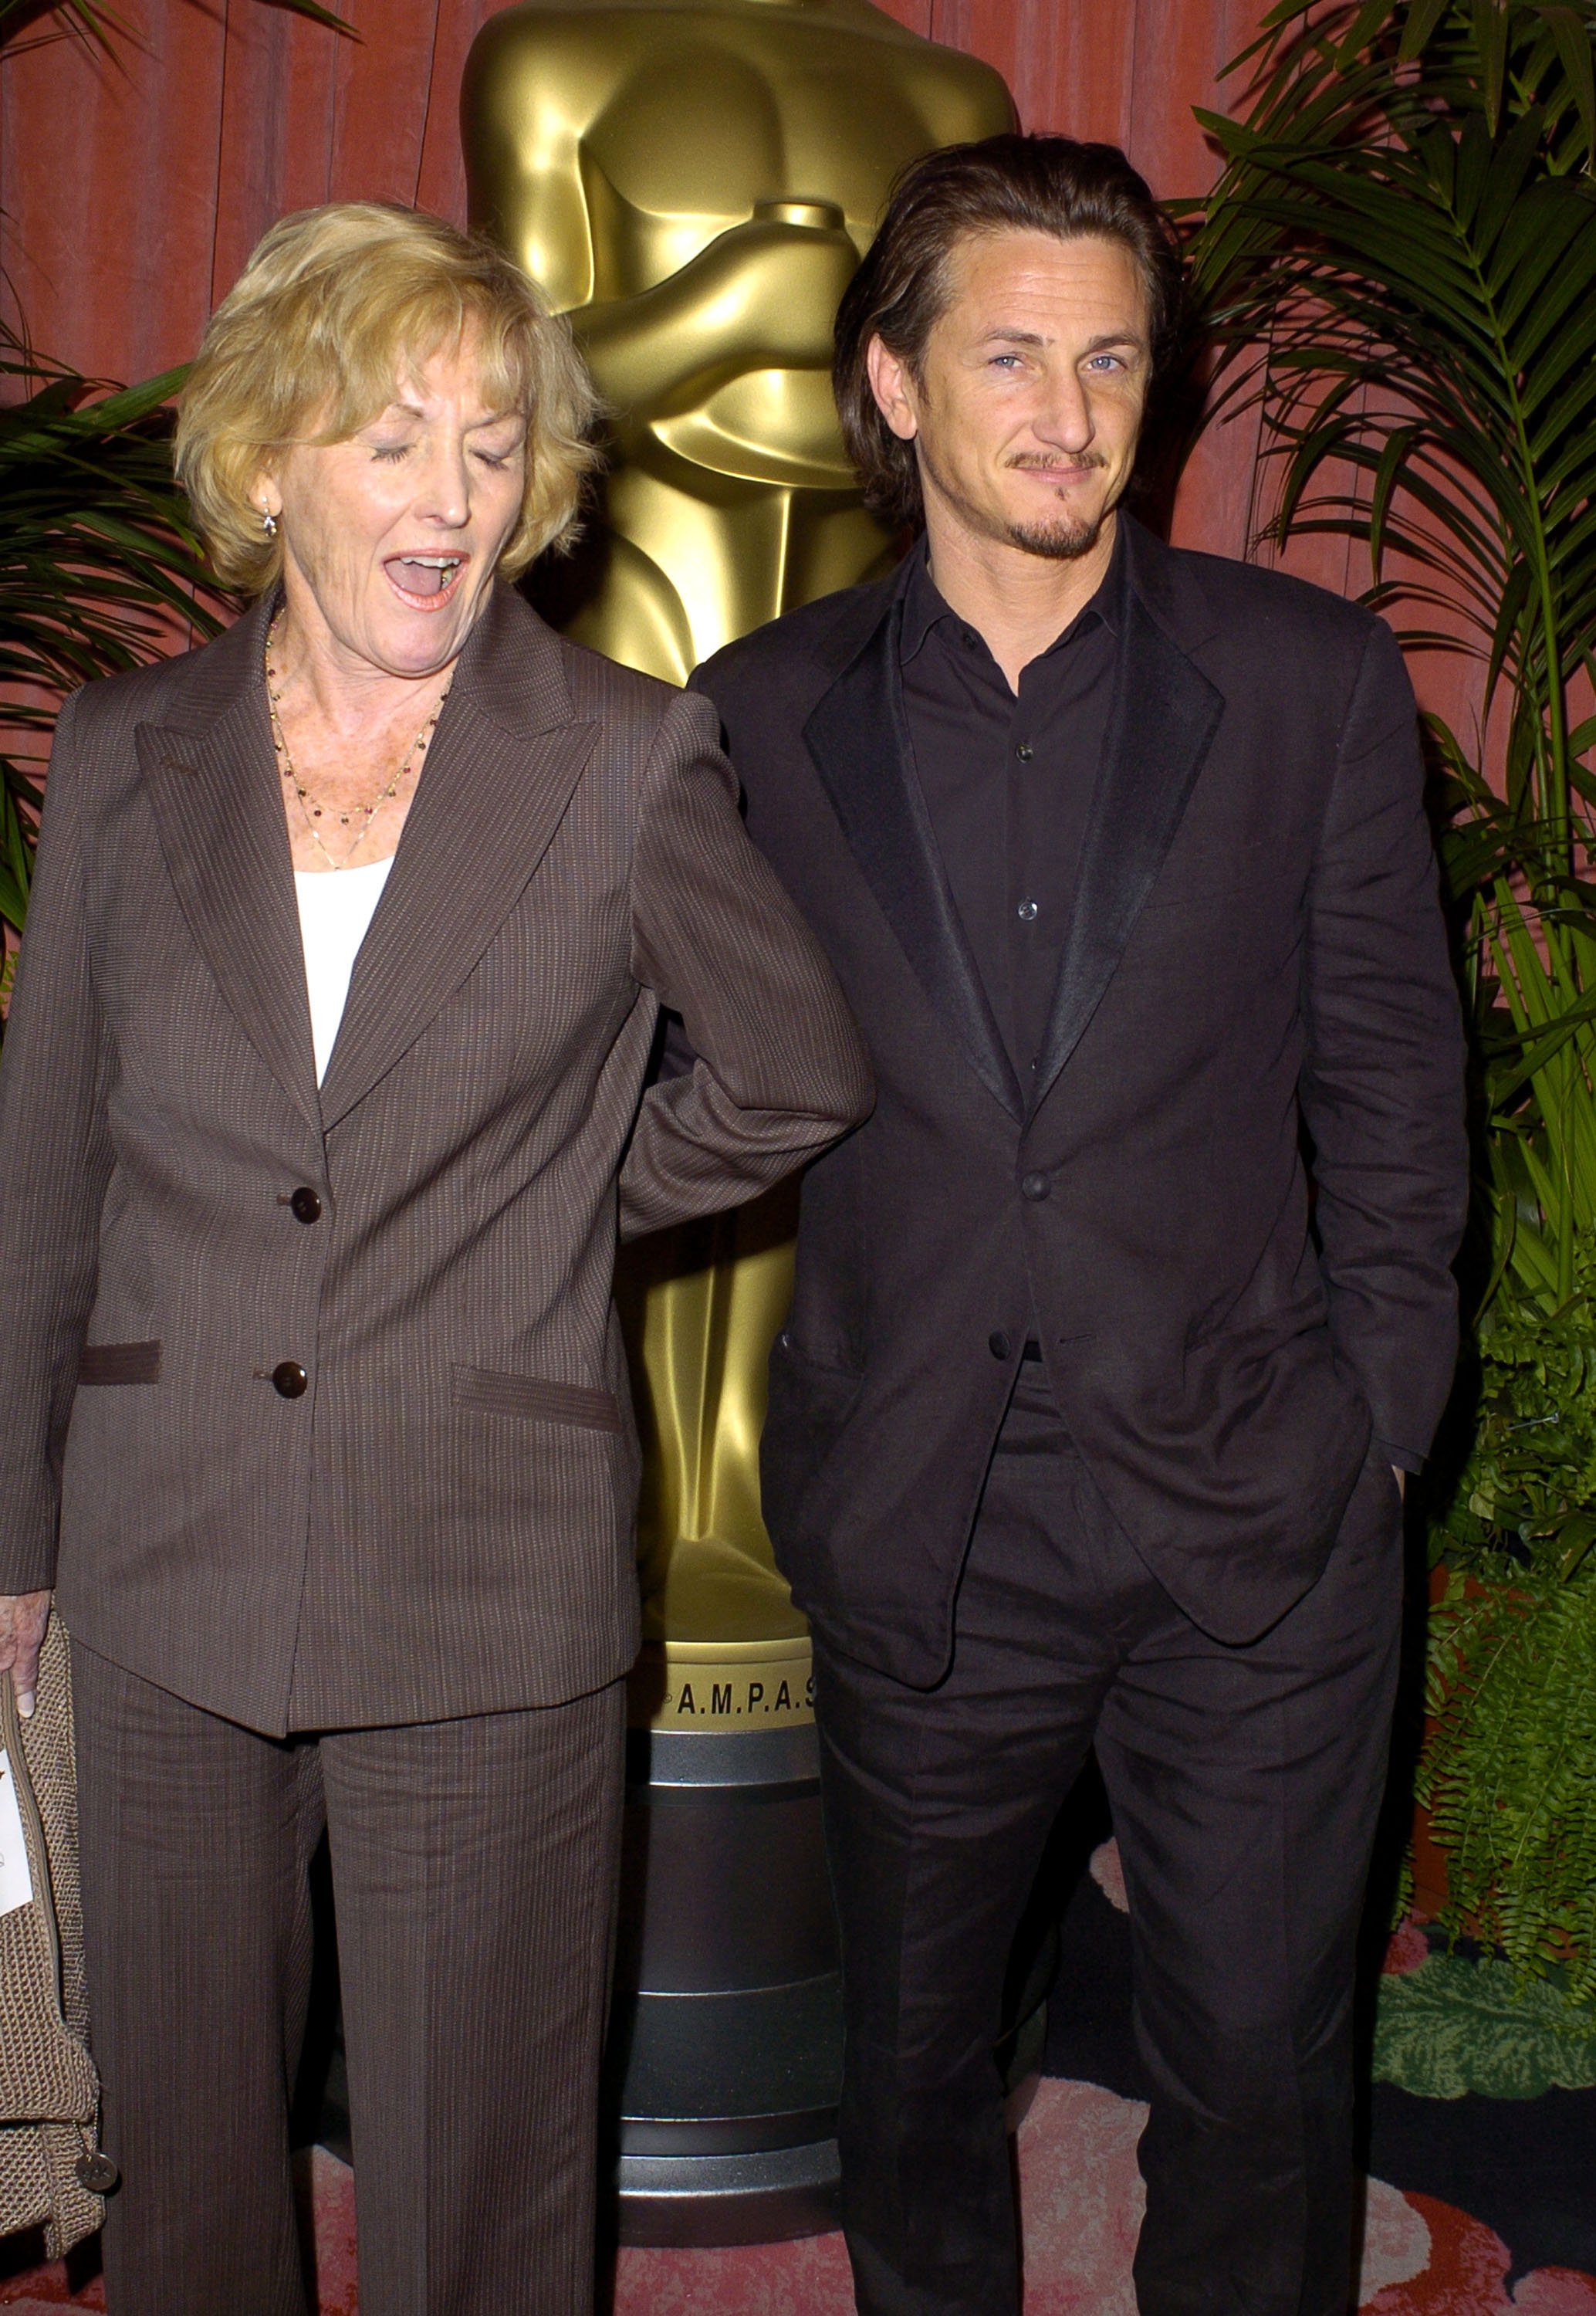 Eileen Ryan and son Sean Penn during The 76th Annual Academy Awards Nominees Luncheon at Beverly Hilton Hotel in Beverly Hills, California, United States. | Source: Getty Images